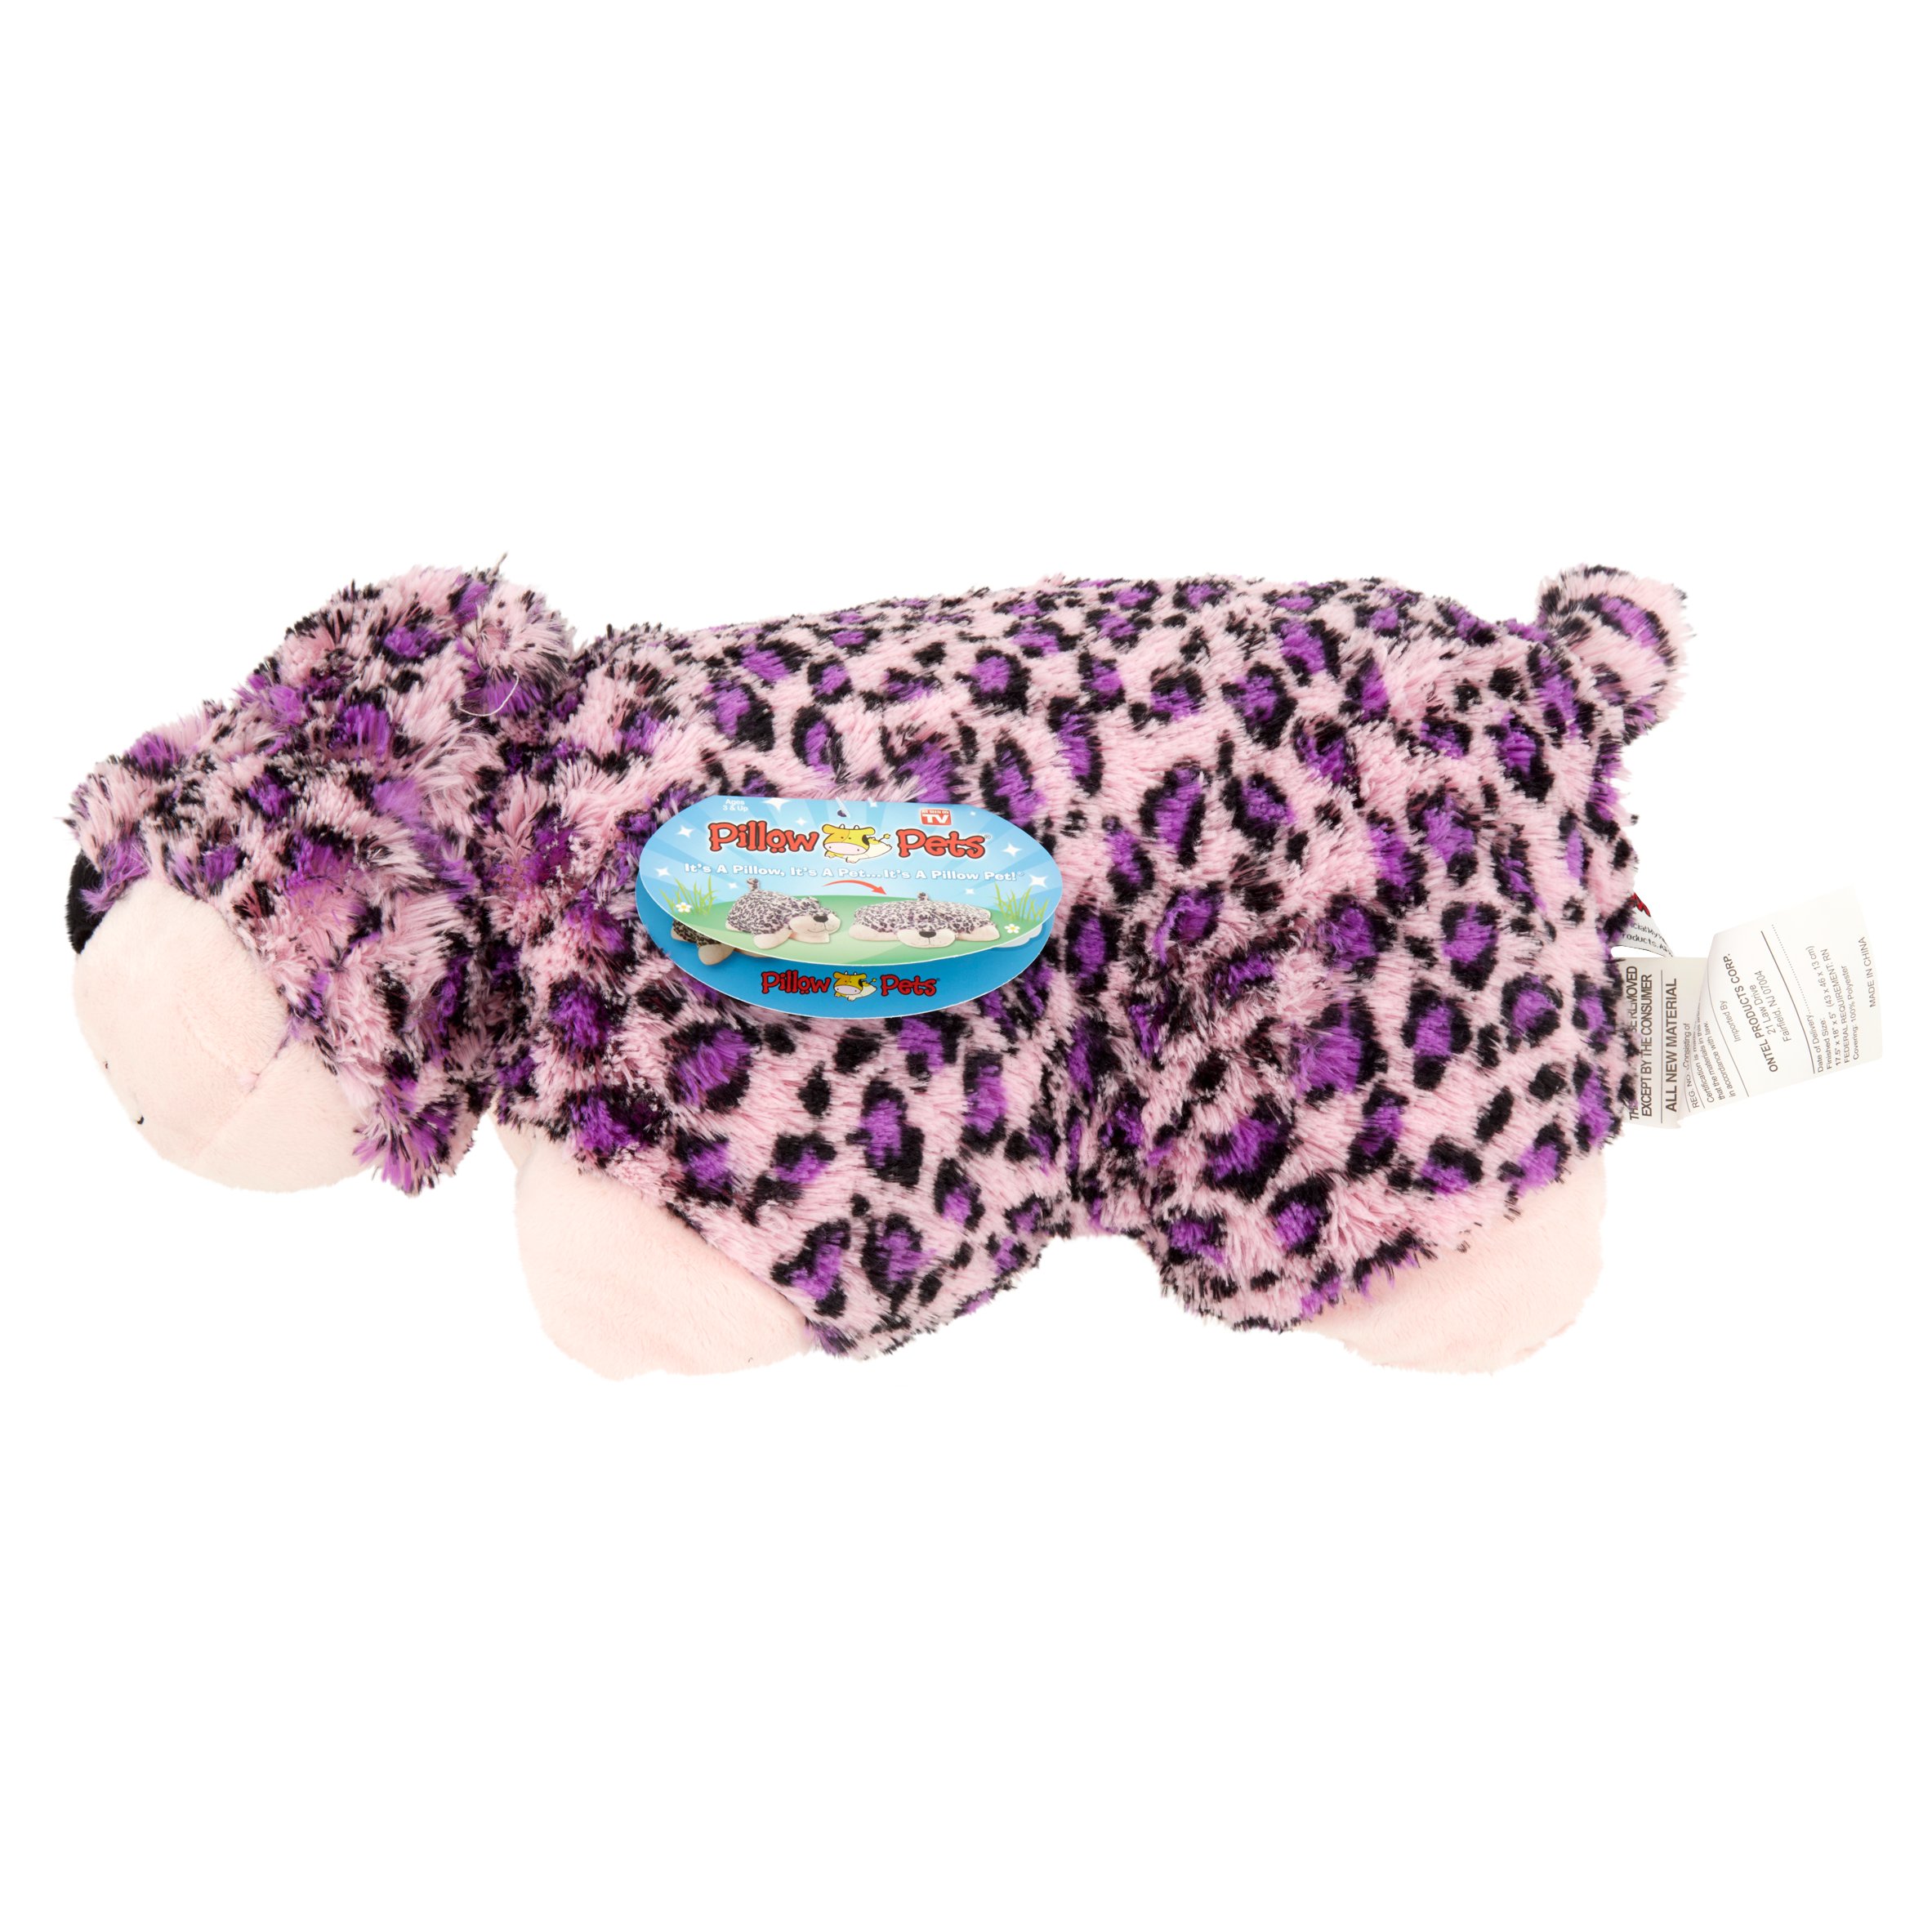 As Seen on TV Pillow Pet, Pink Leopard - image 1 of 5